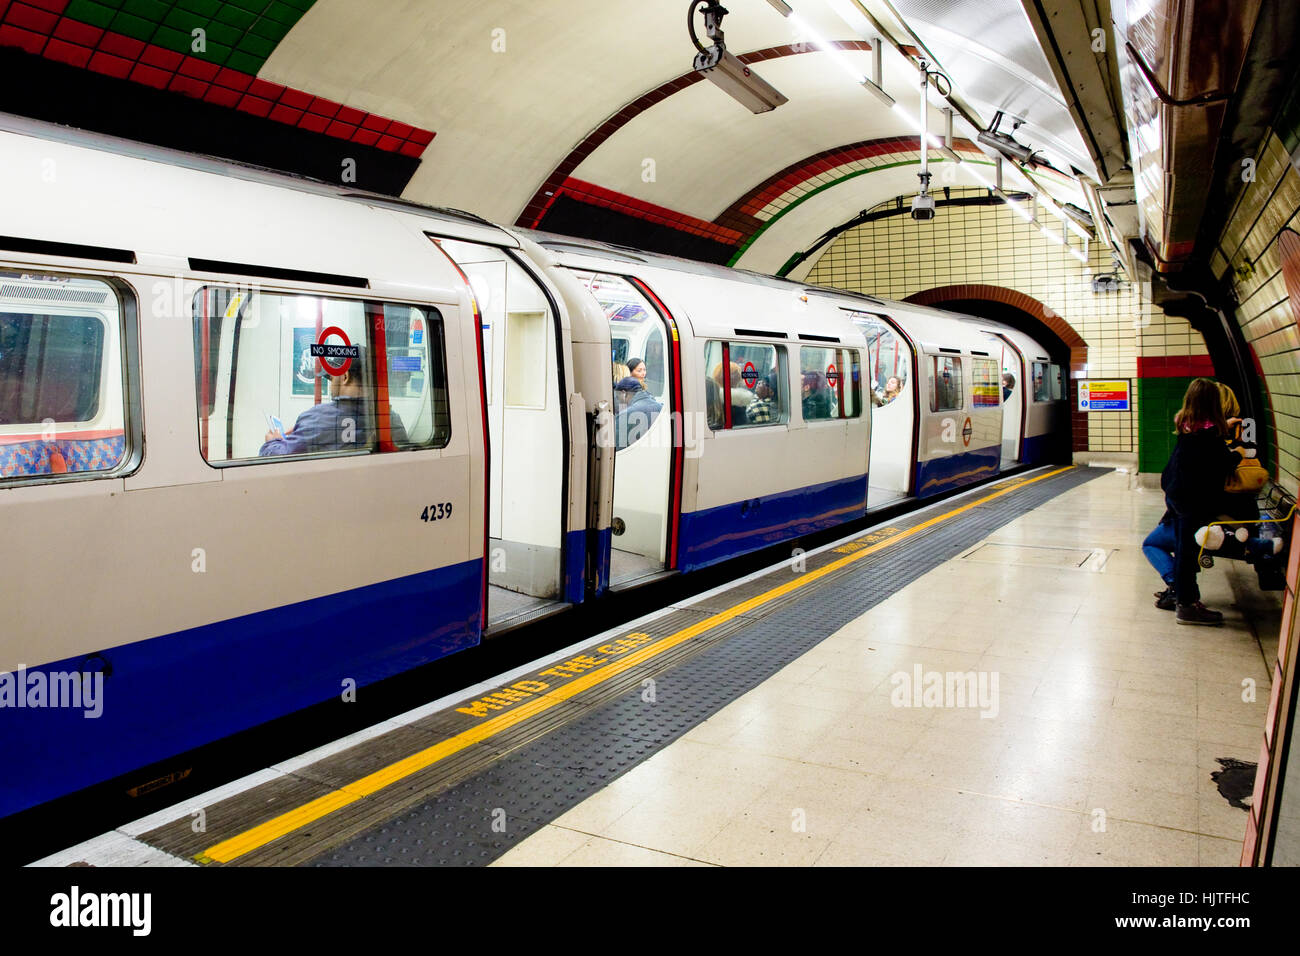 View of the London Underground subway Piccadilly Line with train at station platform. Stock Photo